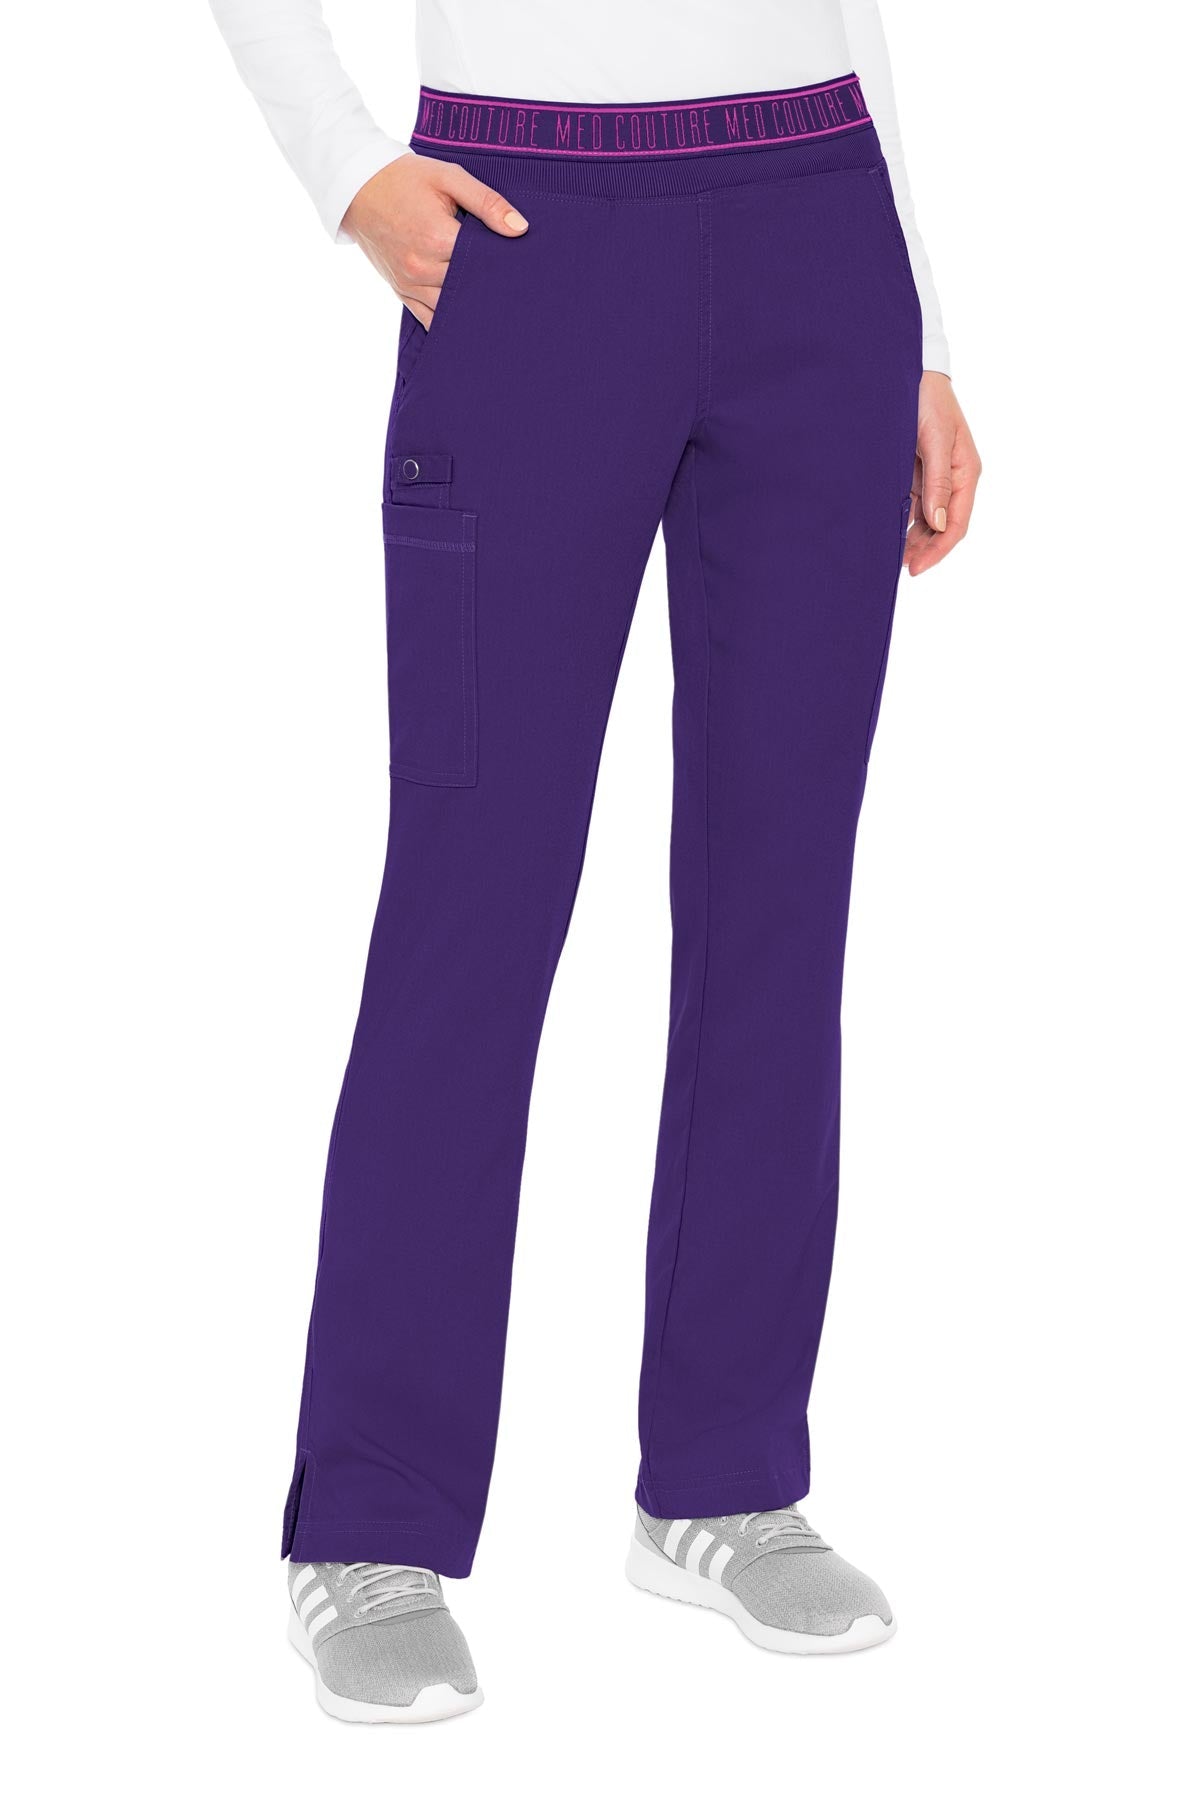 MED COUTURE Yoga 2 Cargo Pocket Pant PLUS